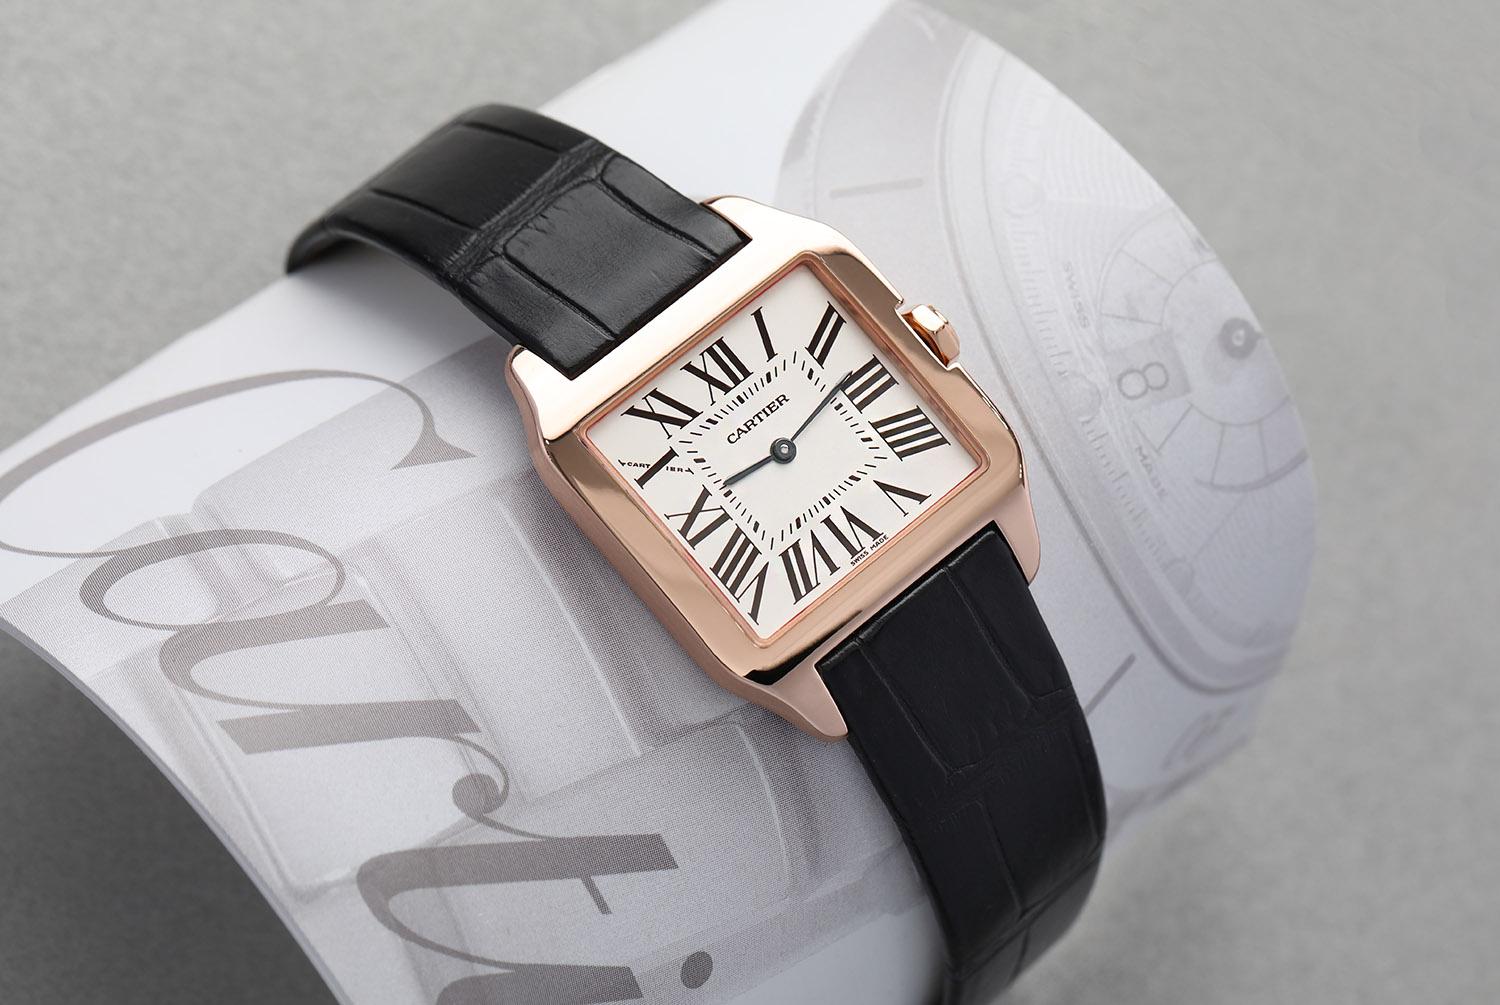 Cartier Santos Ladies Dumont Quartz, 18k Rose Gold, W2009251 - Quartz. 18k rose gold square case (30 mm x 38 mm) diameter. Silver Dial with Roman numerals. Black alligator strap with 18k rose gold deployant style buckle. Watch has been